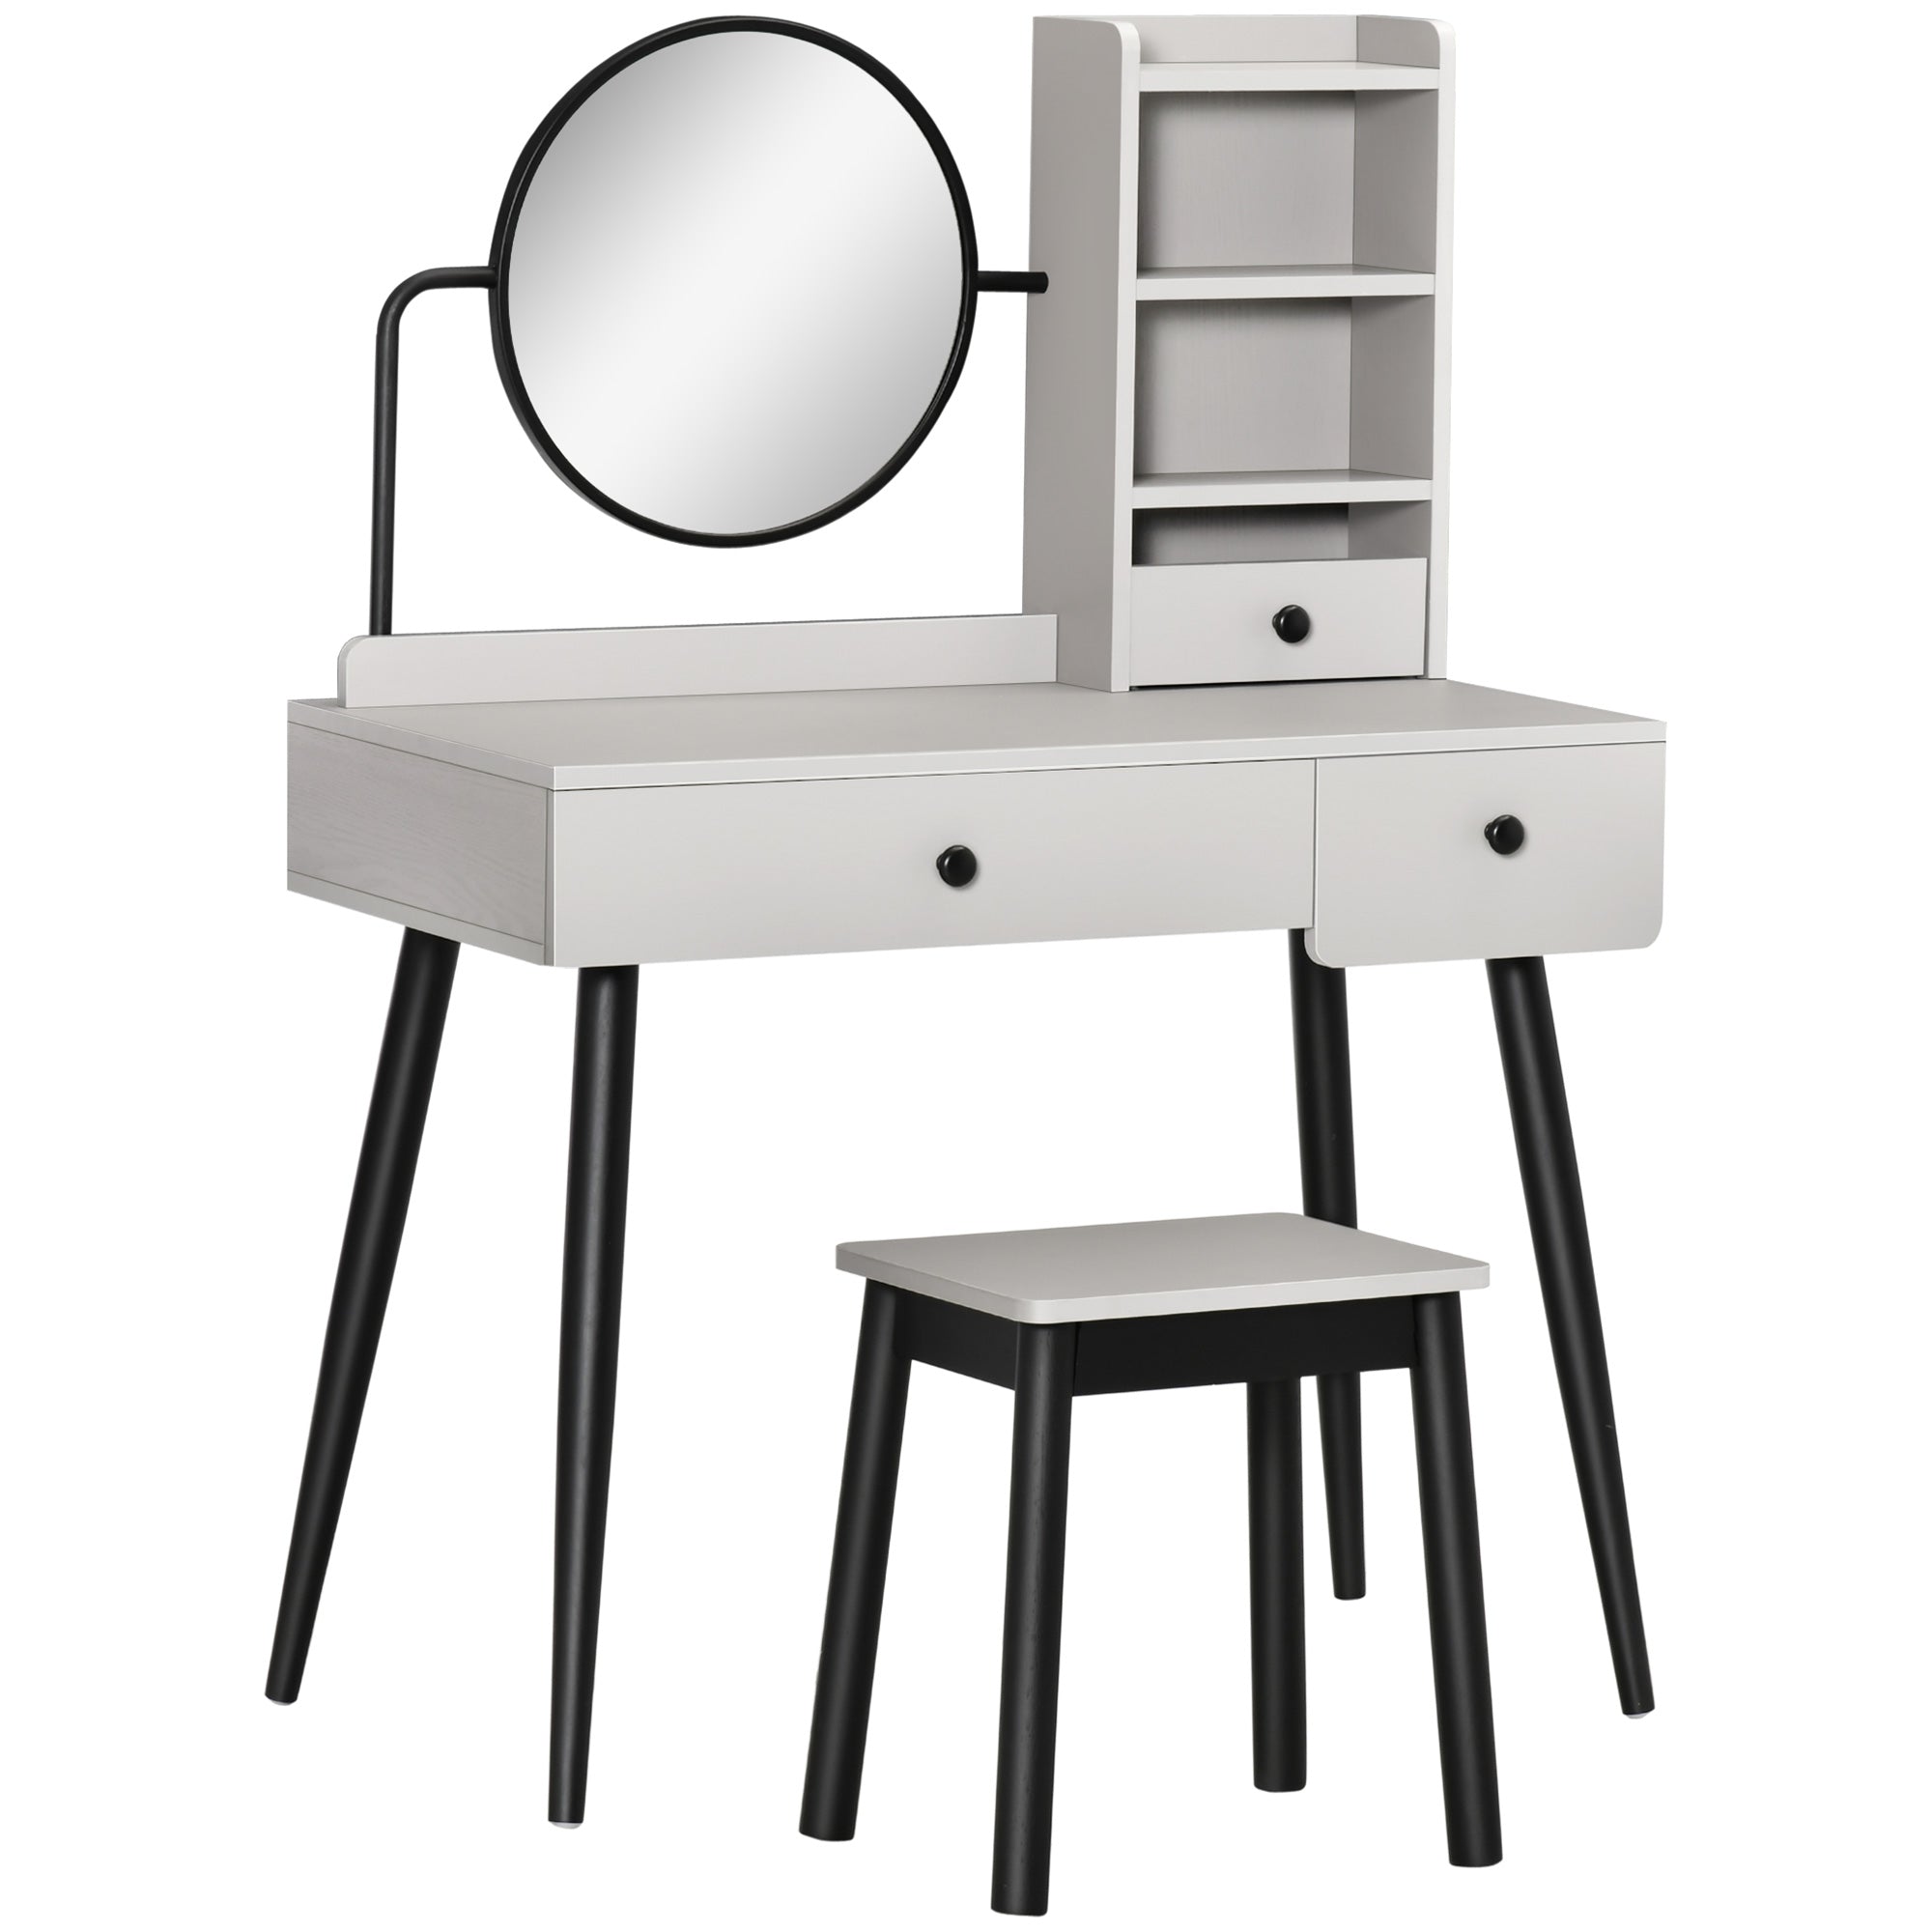 HOMCOM Dressing Table Set with Mirror and Stool, Vanity Makeup Table with 3 Drawers and Open Shelves for Bedroom, Living Room, Grey - Inspirely